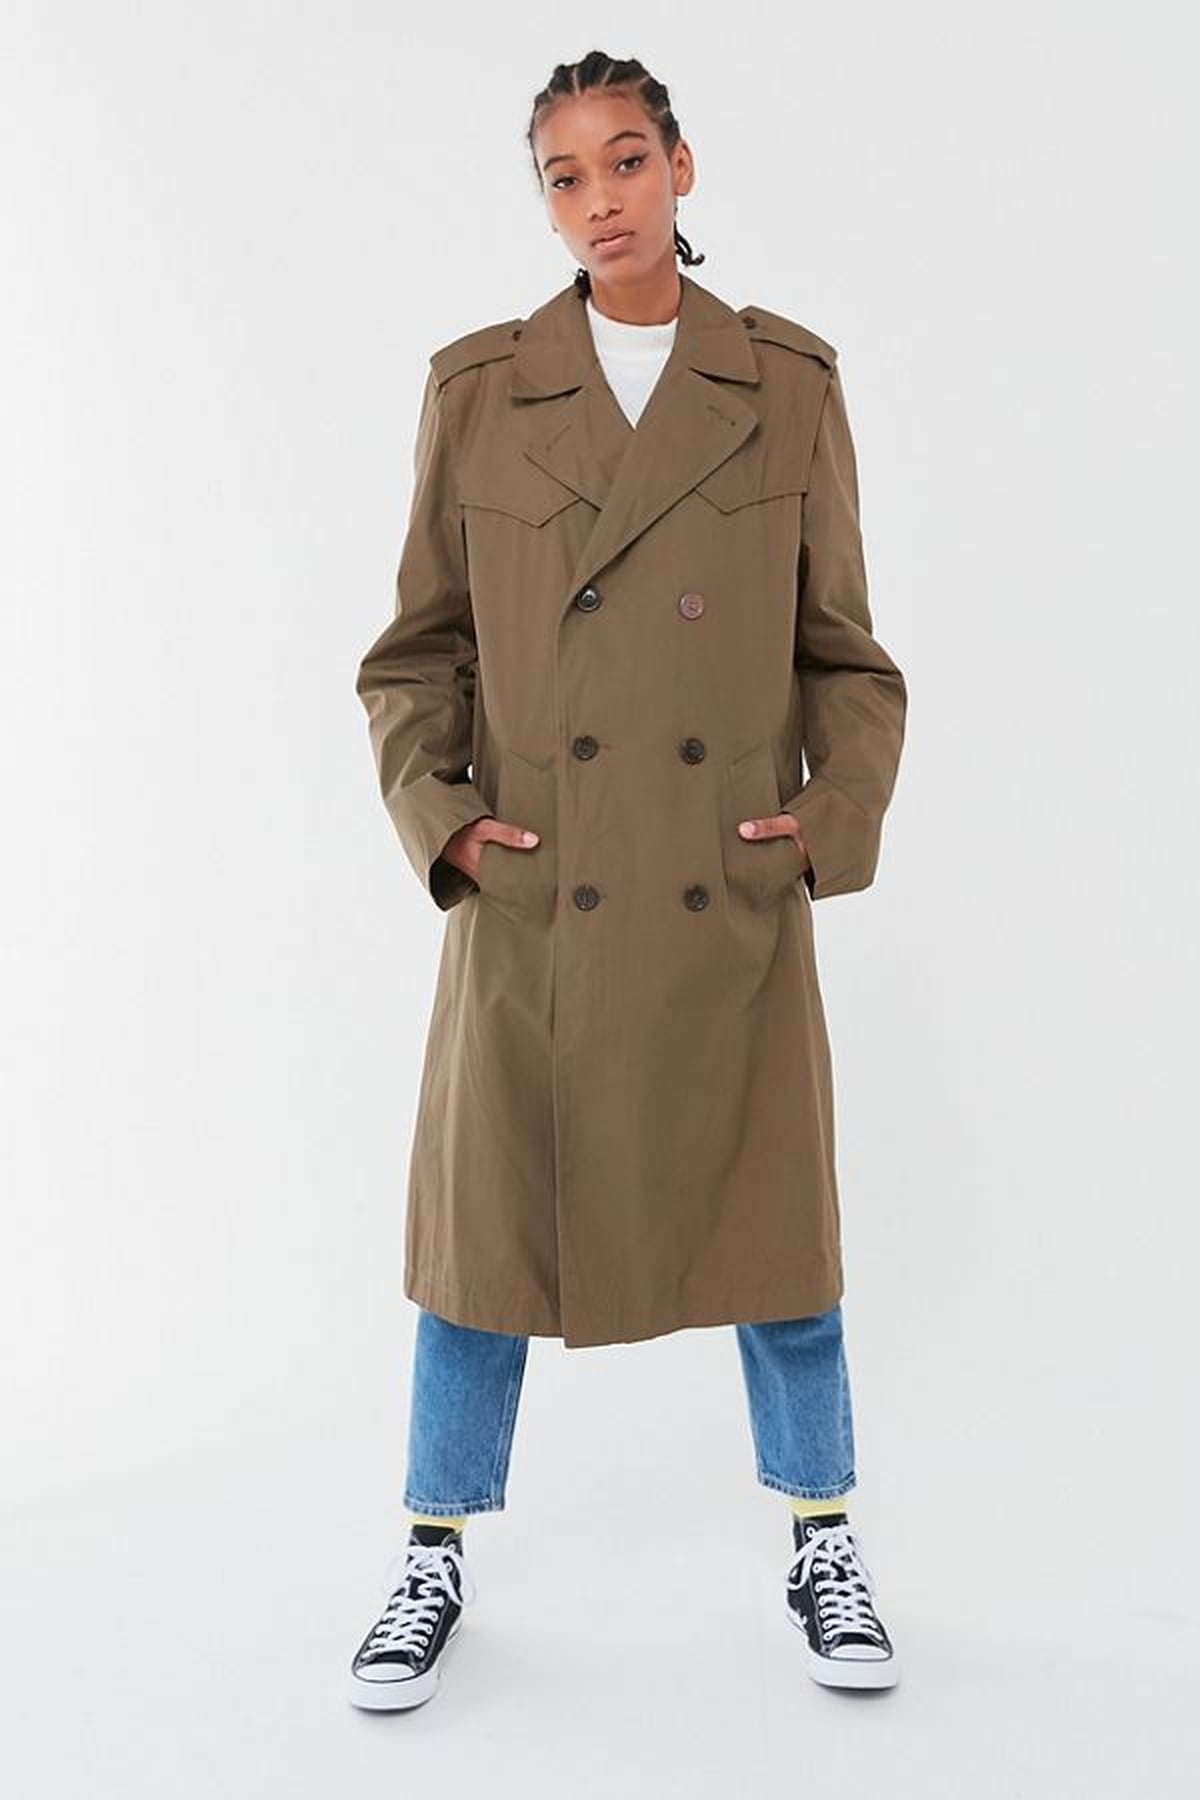 These Are the Best Trench Coats in 2019 | POPSUGAR Fashion